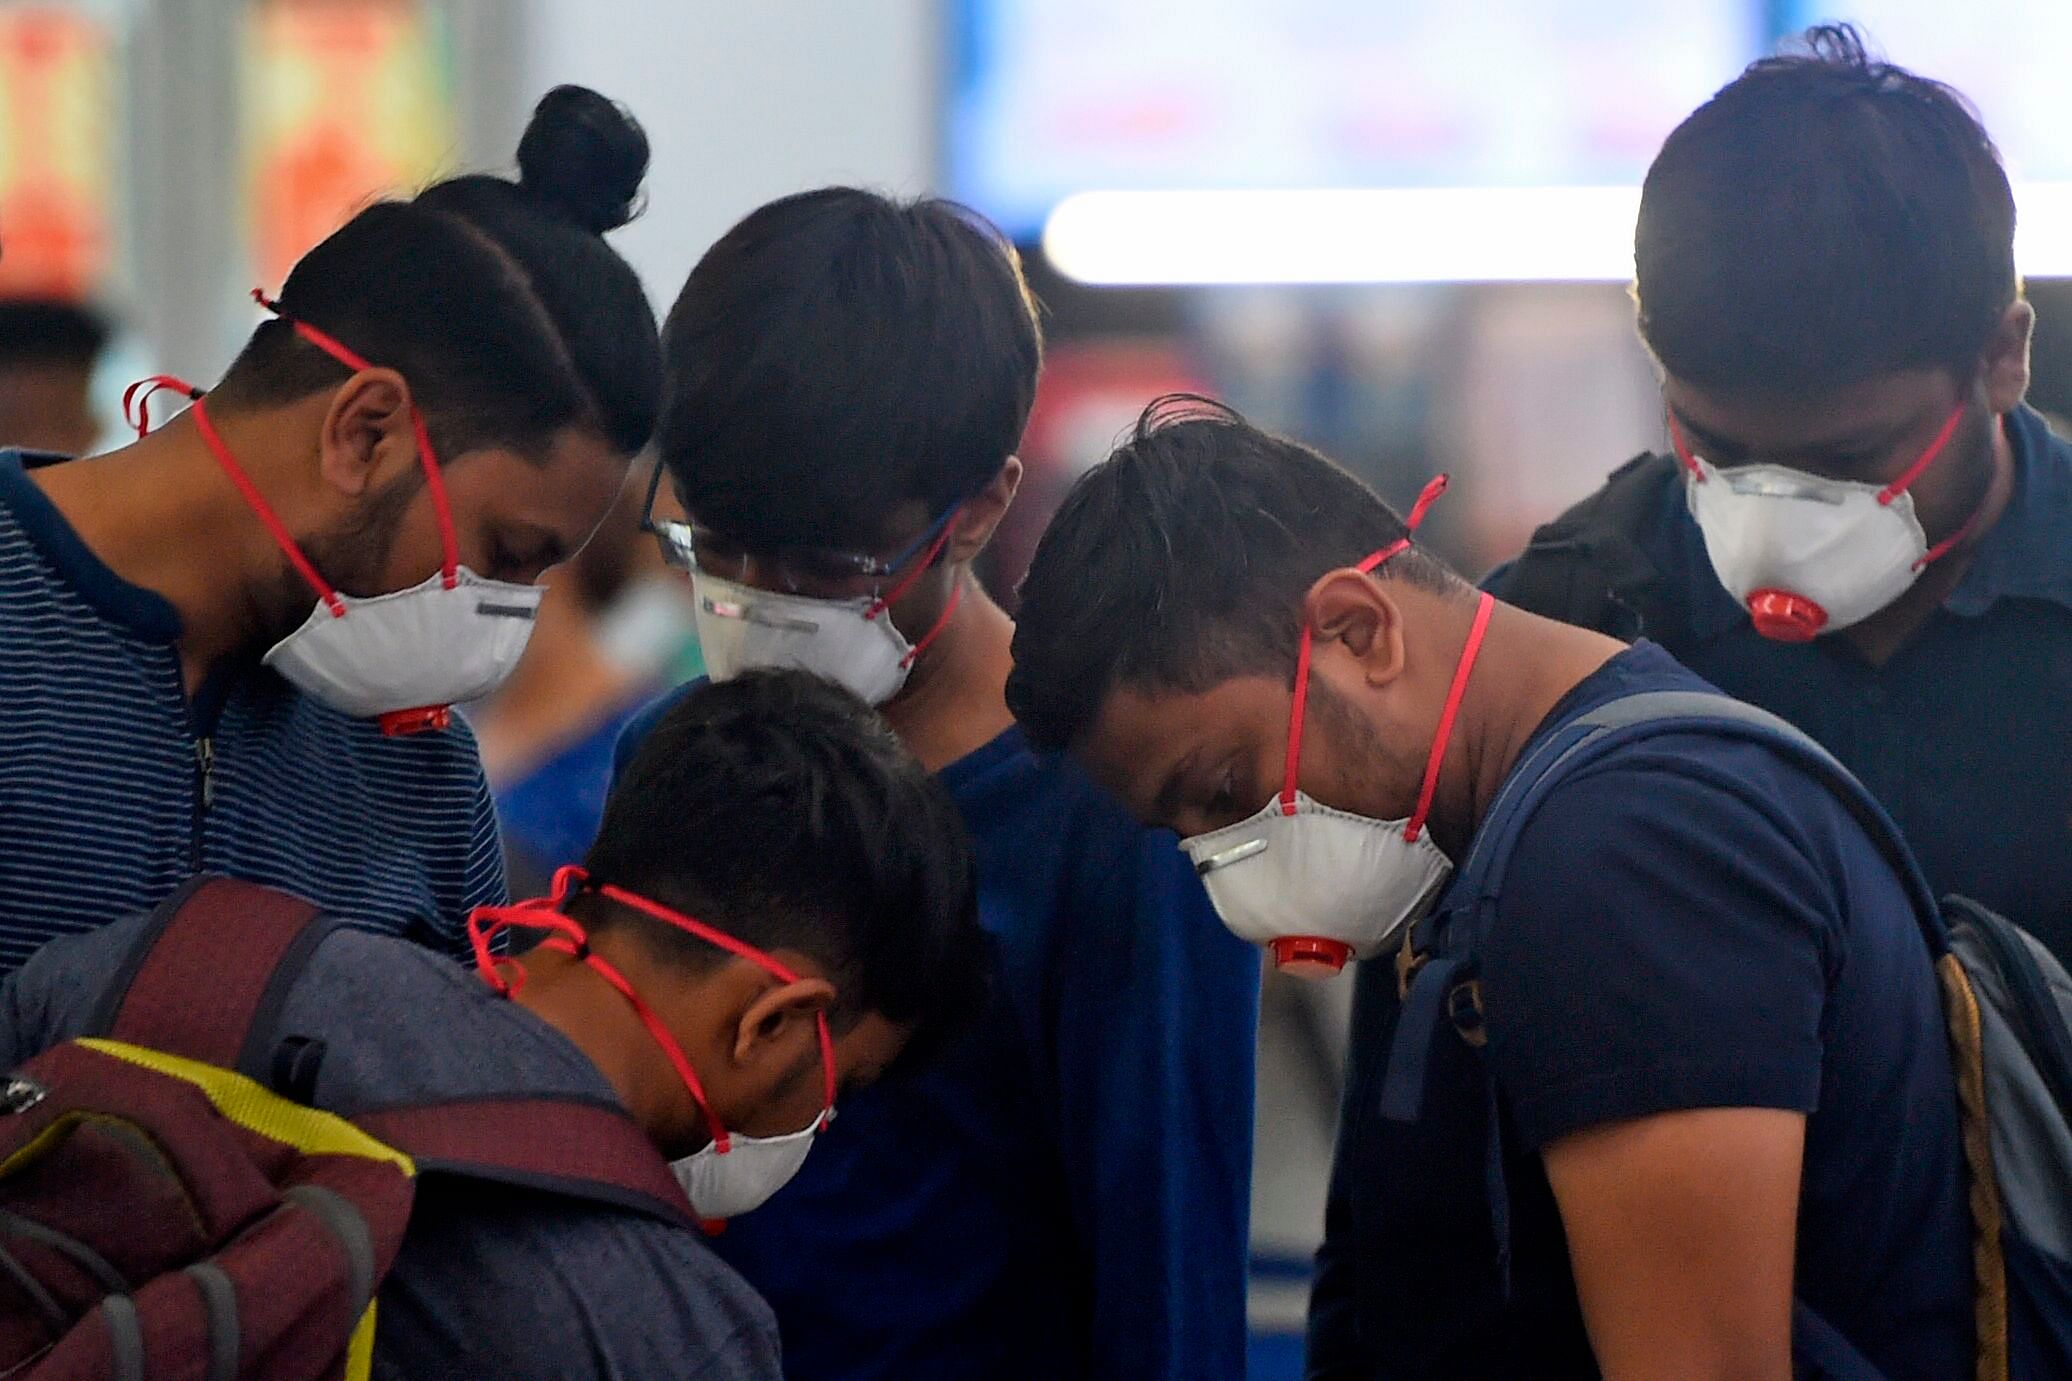 Passengers wearing facemasks amid concerns over the spread of the COVID-19 novel coronavirus, stand in a queue at a counter inside the airport in Goa. (Credit: AFP)